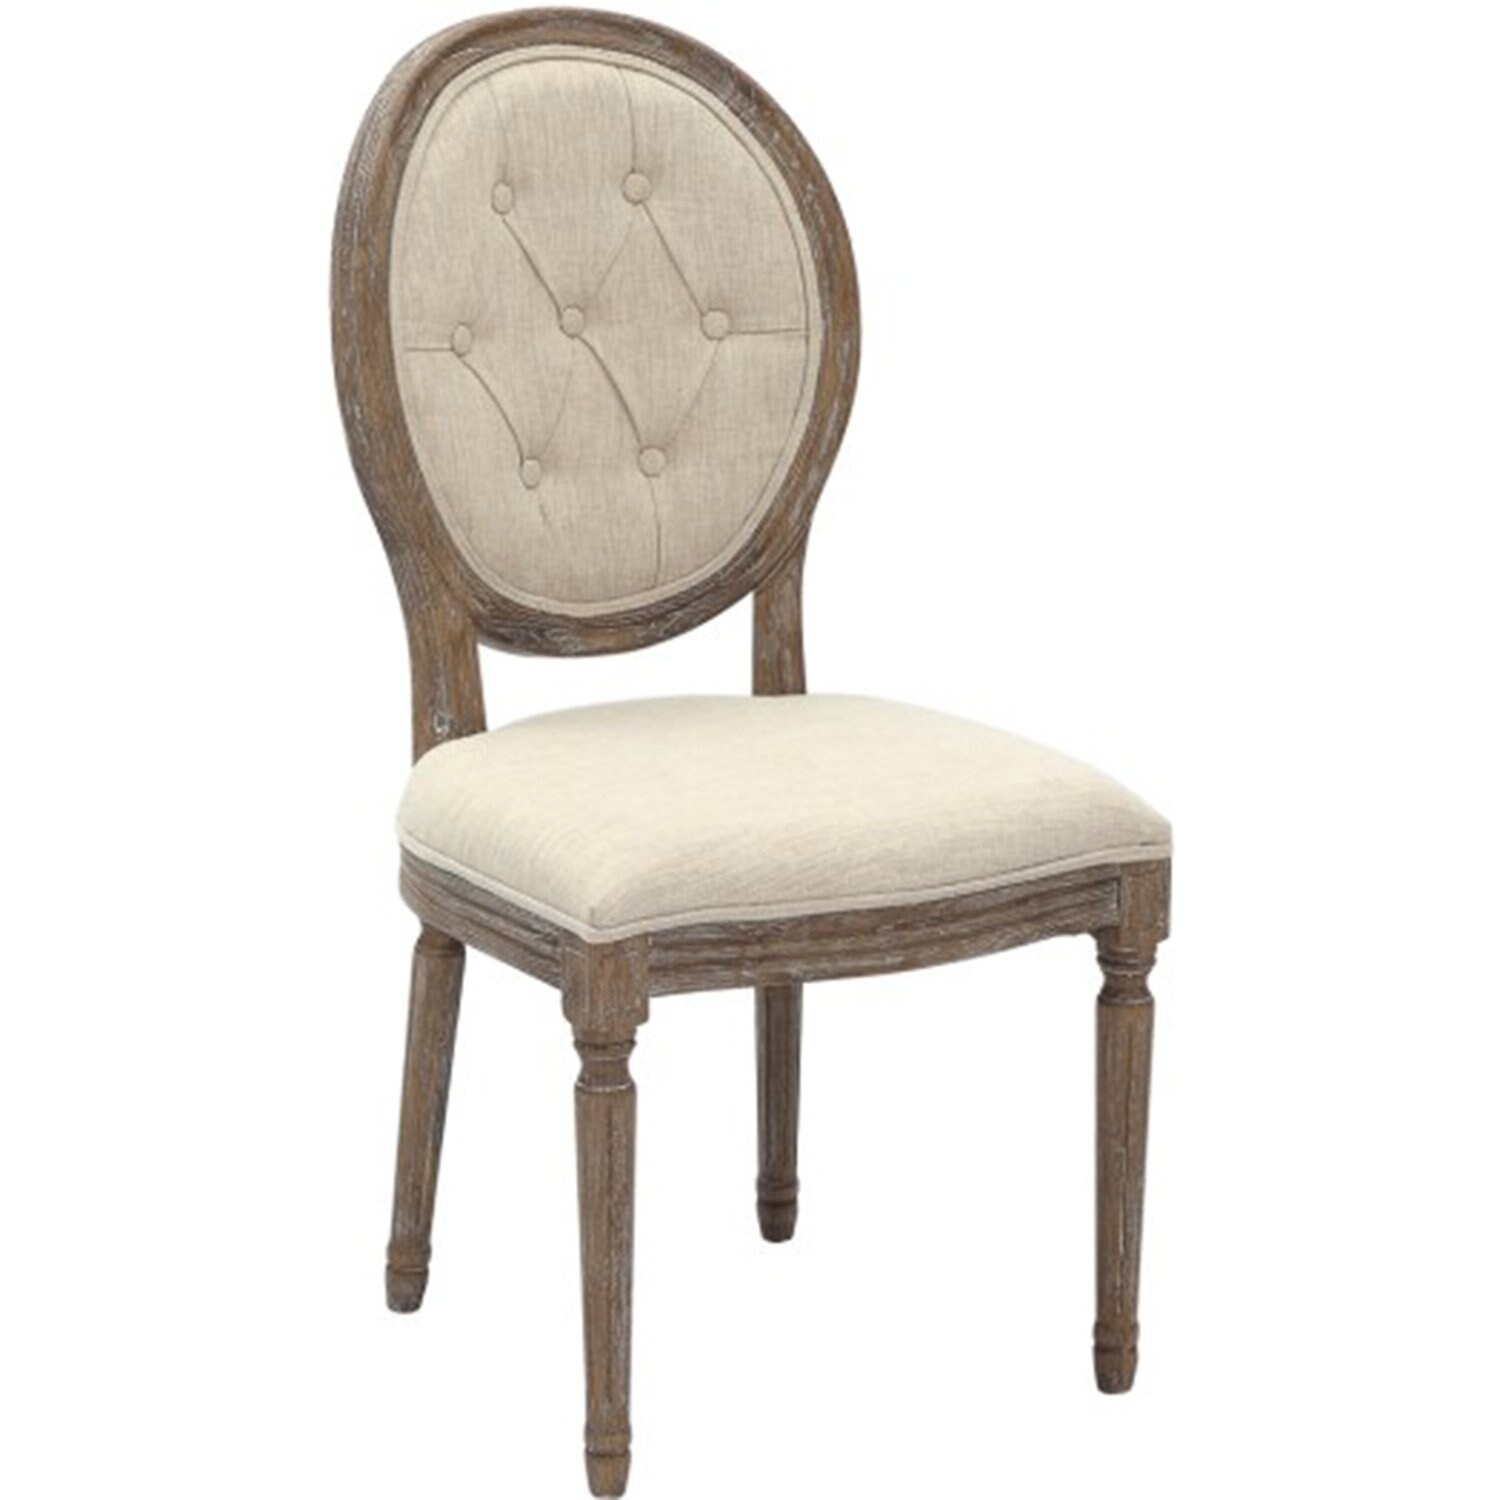 Fabric Plastic Dining Side Chair 